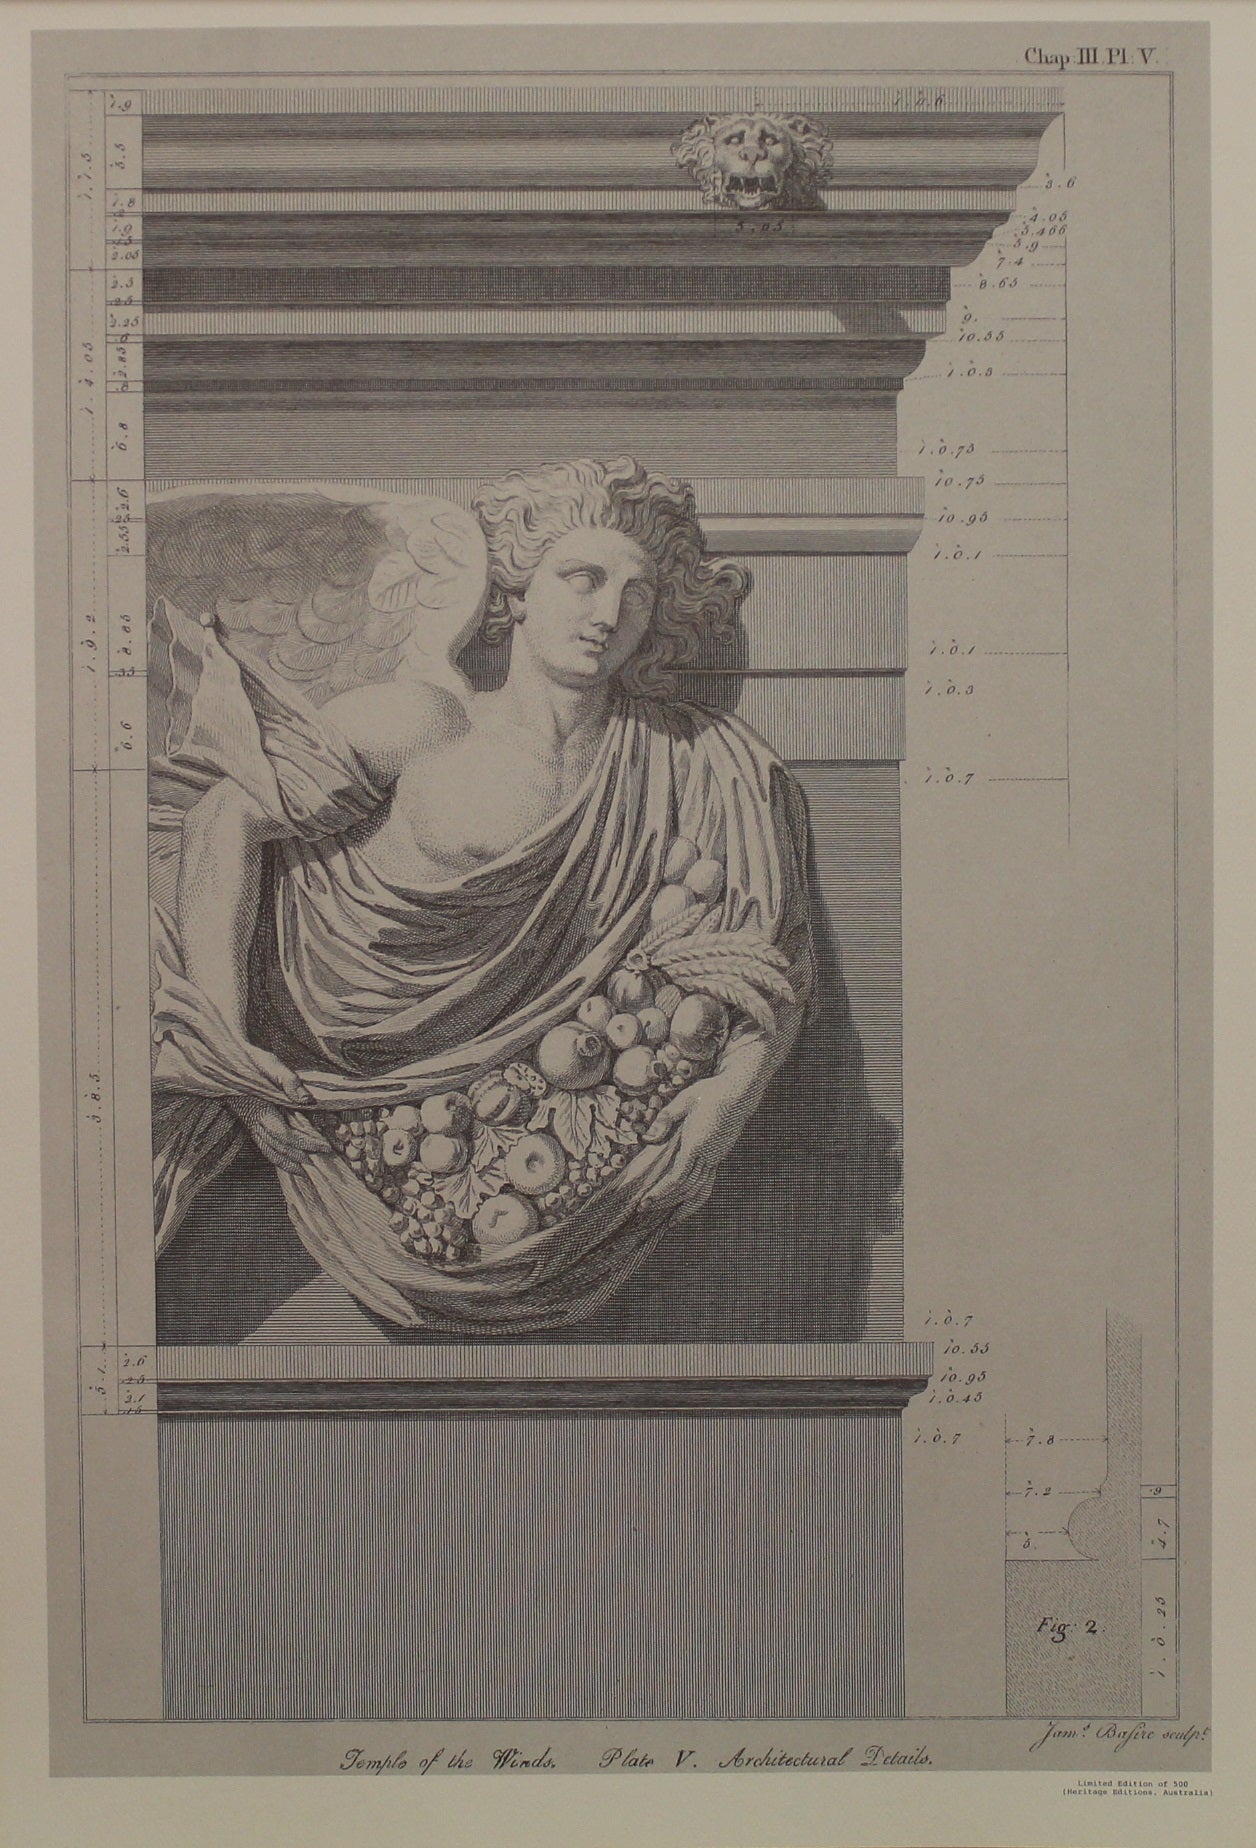 Architecture, Basire J, Temple of the Winds, Plate V, c1770, Reproduction, Black and White